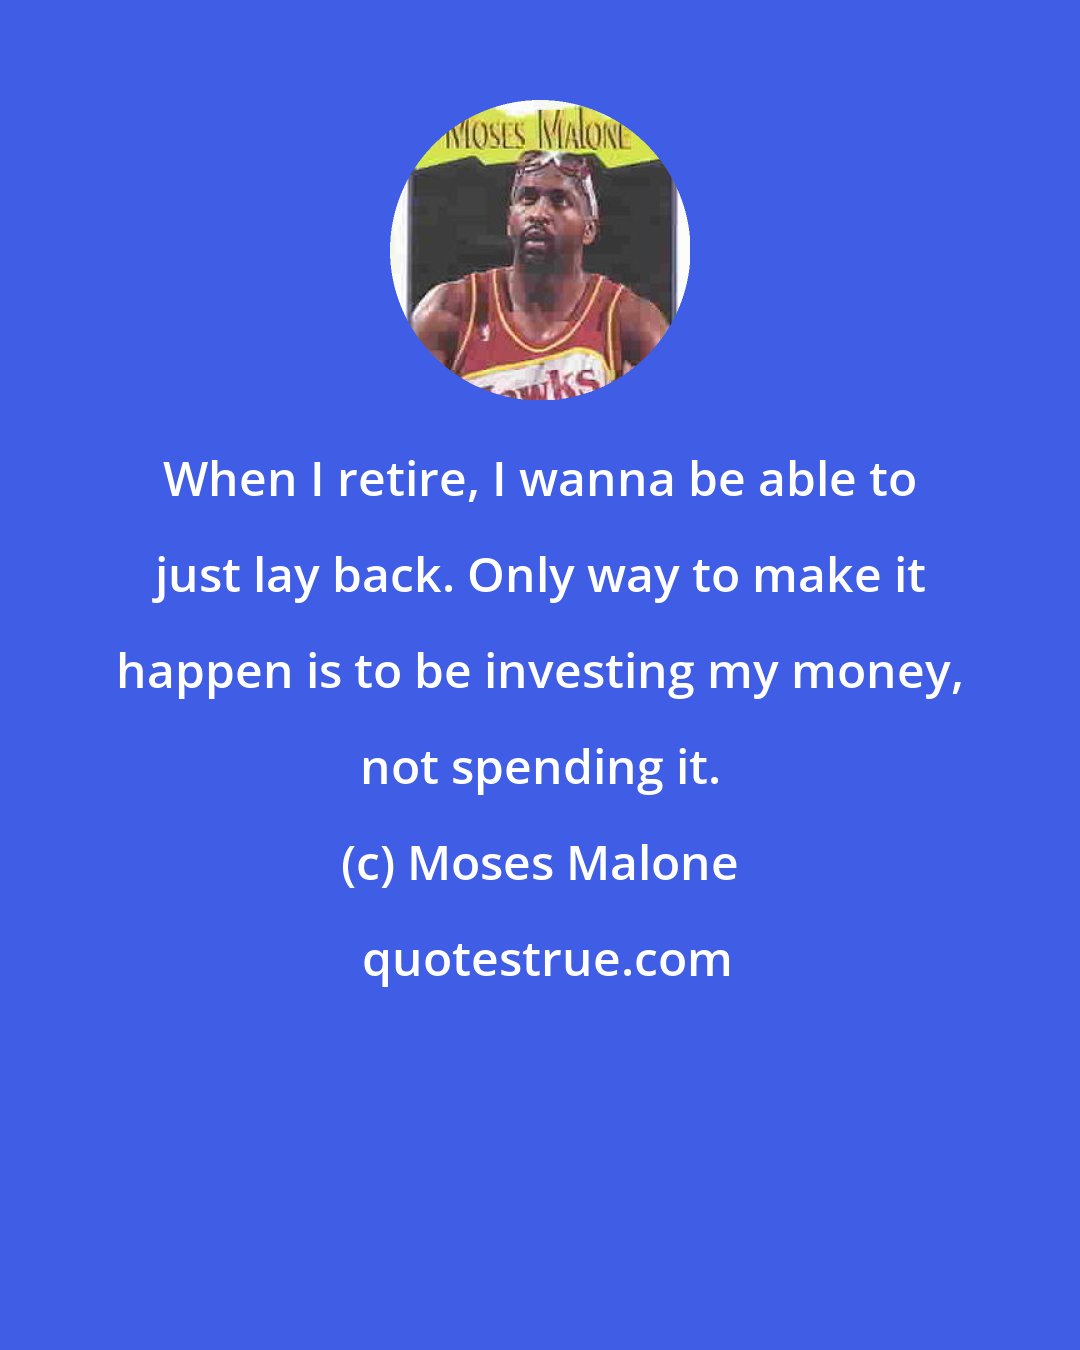 Moses Malone: When I retire, I wanna be able to just lay back. Only way to make it happen is to be investing my money, not spending it.